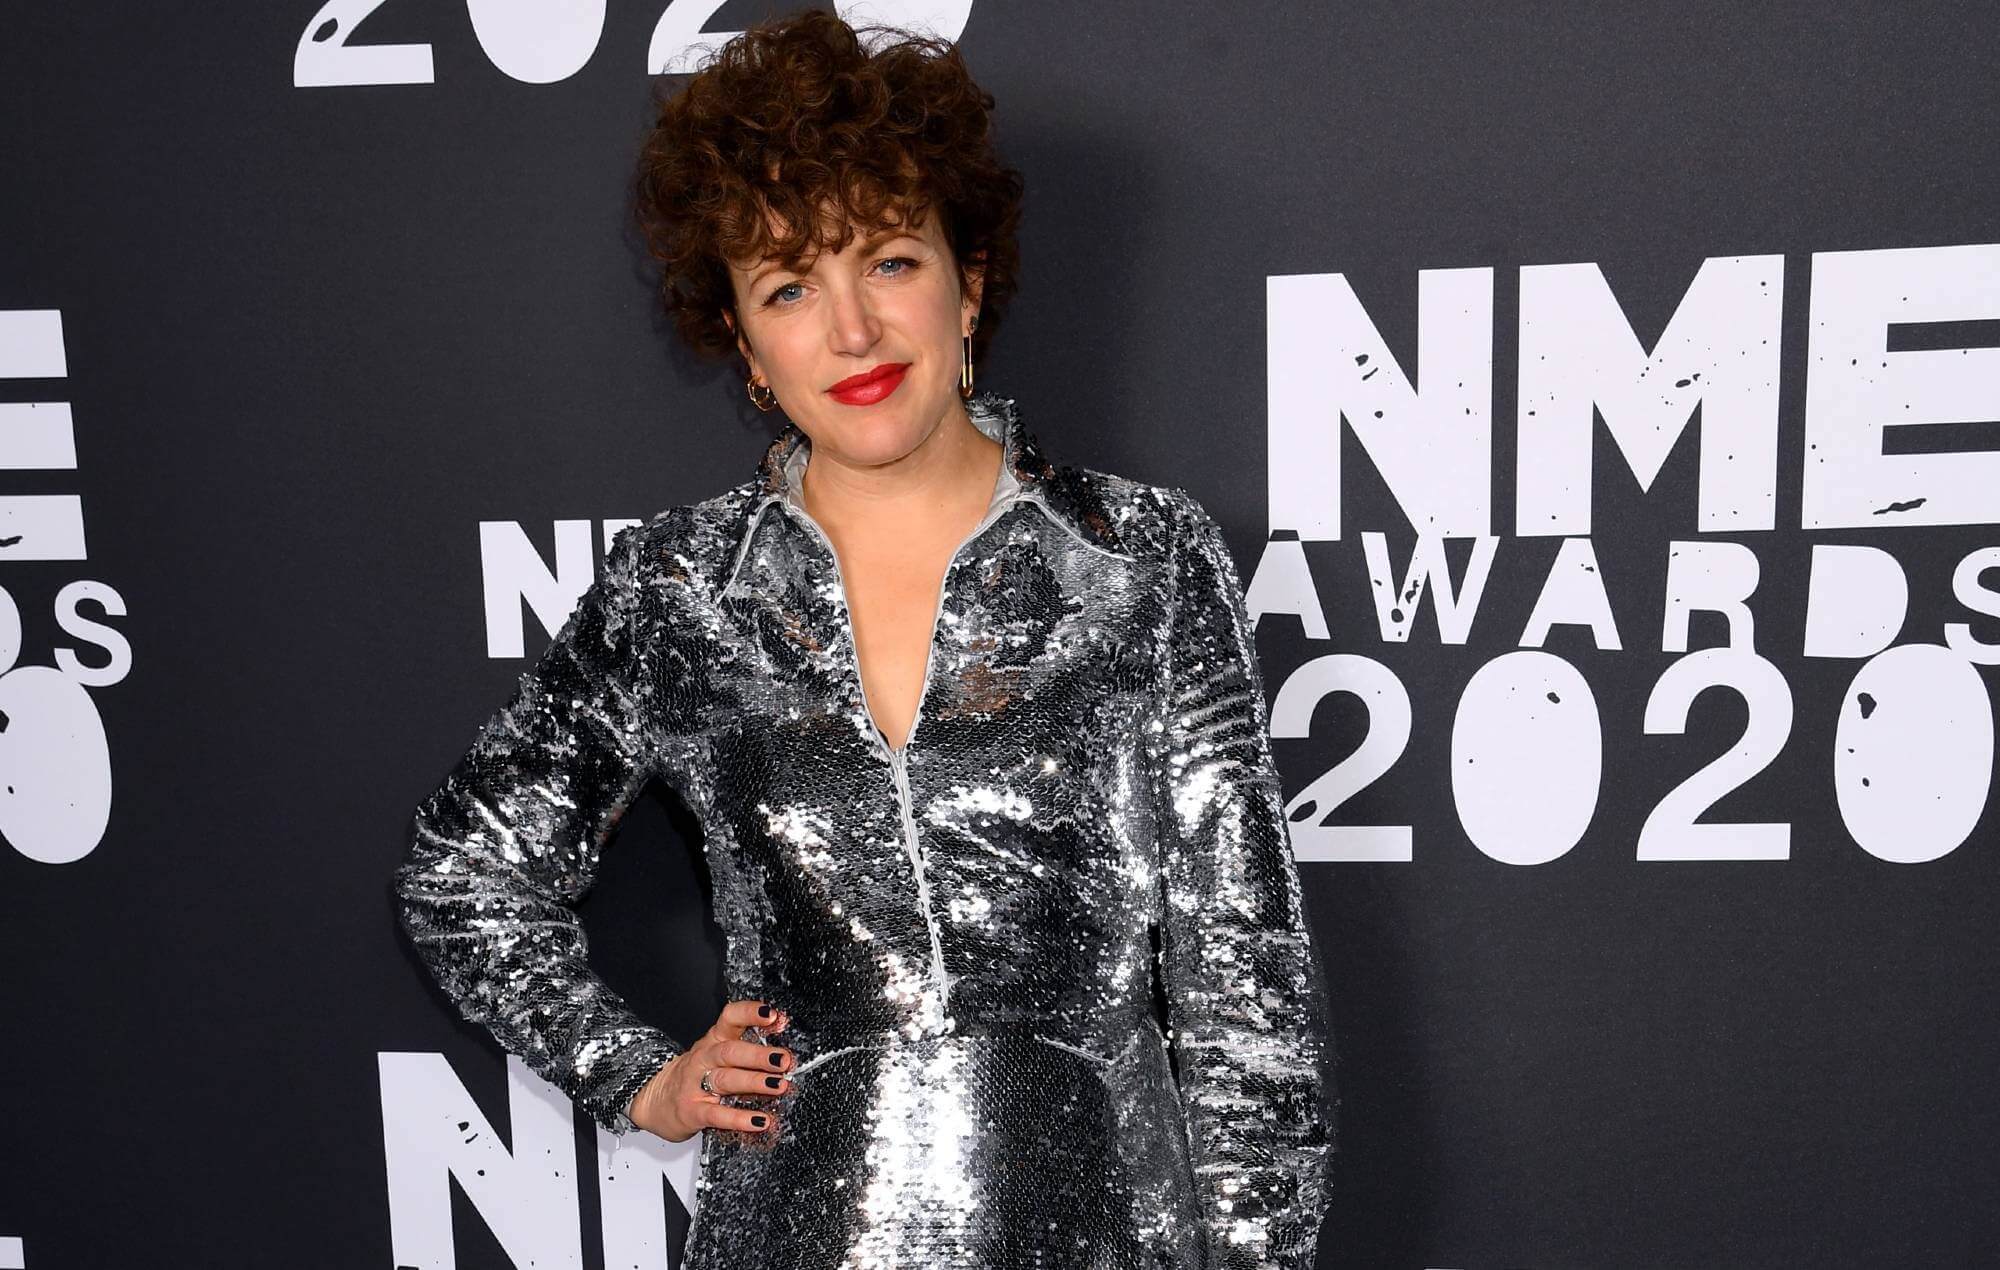 22 Captivating Facts About Annie Mac - Facts.net